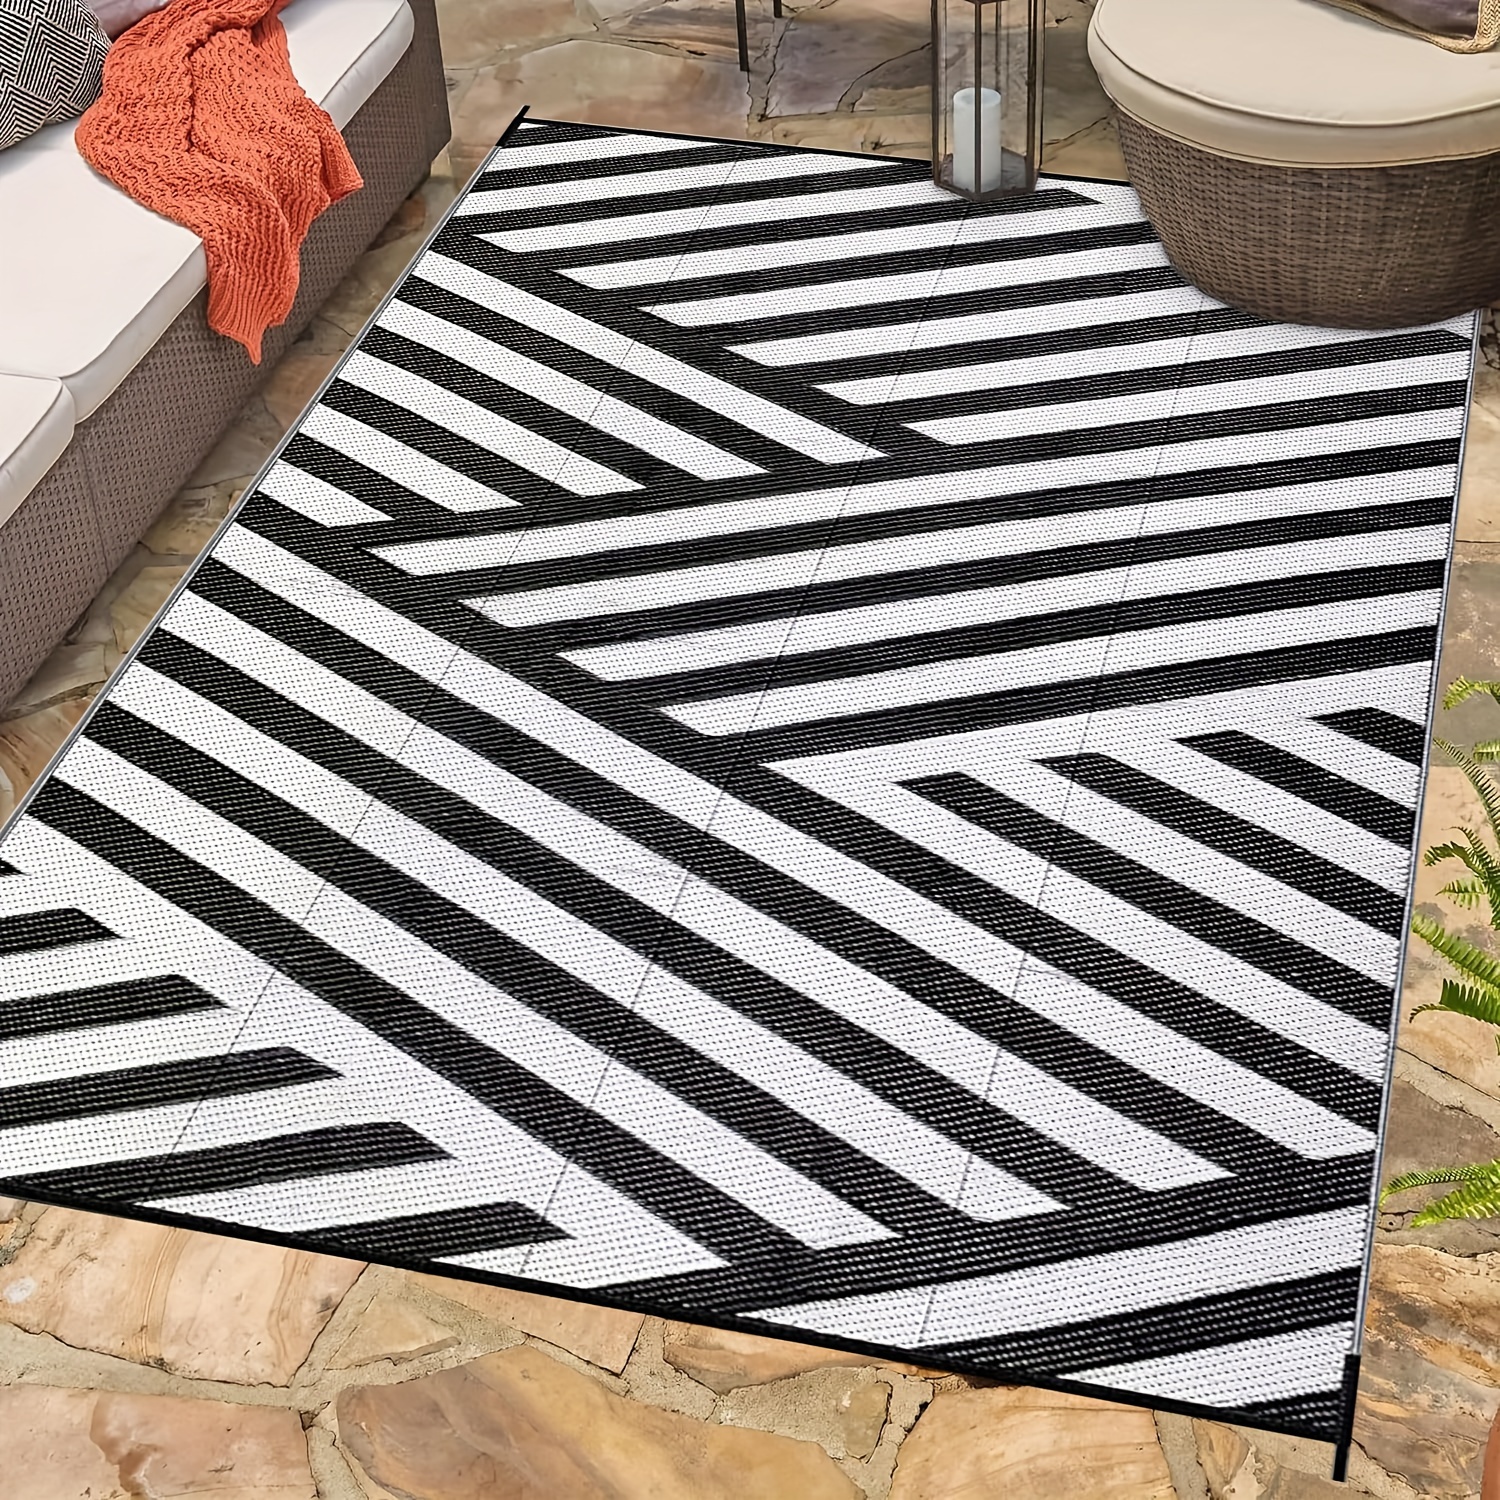 

Waterproof Outdoor Rug 1pc, Reversible Patio Carpet For Rv Camping, Picnic, Beach, Plastic Plaid Pattern, Hand Wash Only, Durable 2.16m² Area, Longest Side 1.8m